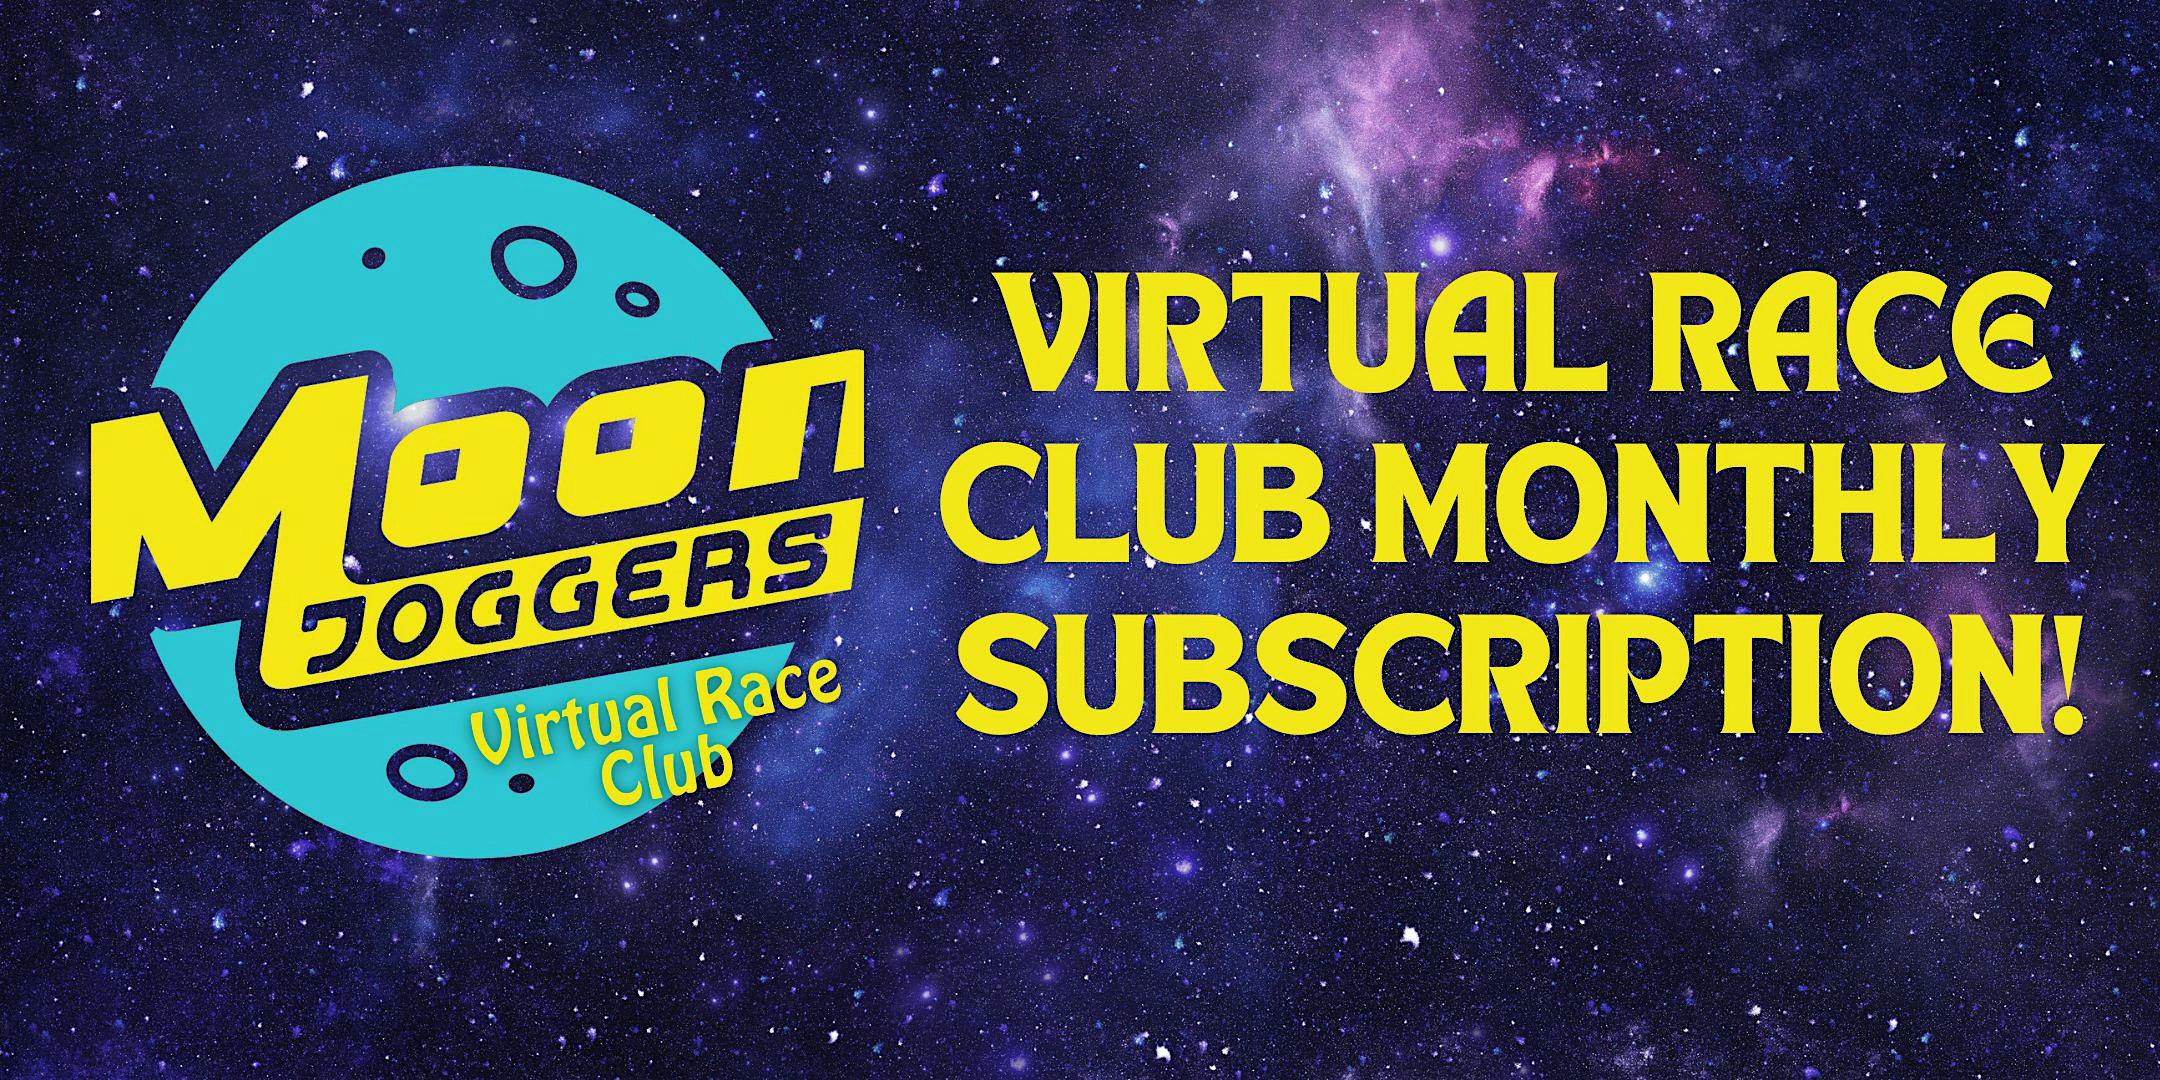 $7 off Moon Joggers  Virtual Race Club Monthly Subscription!